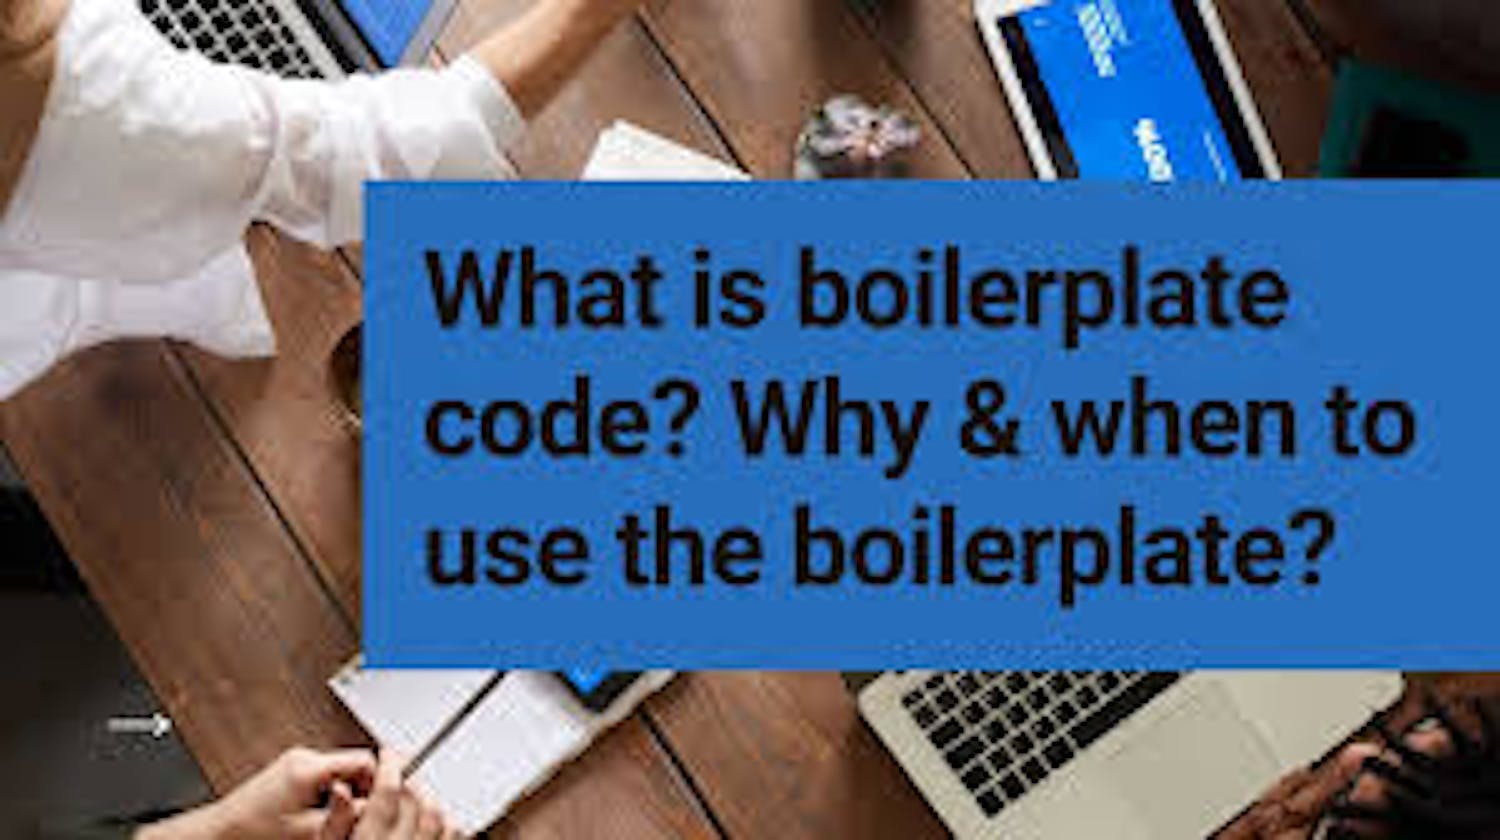 What is a boilerplate code? And why use it?